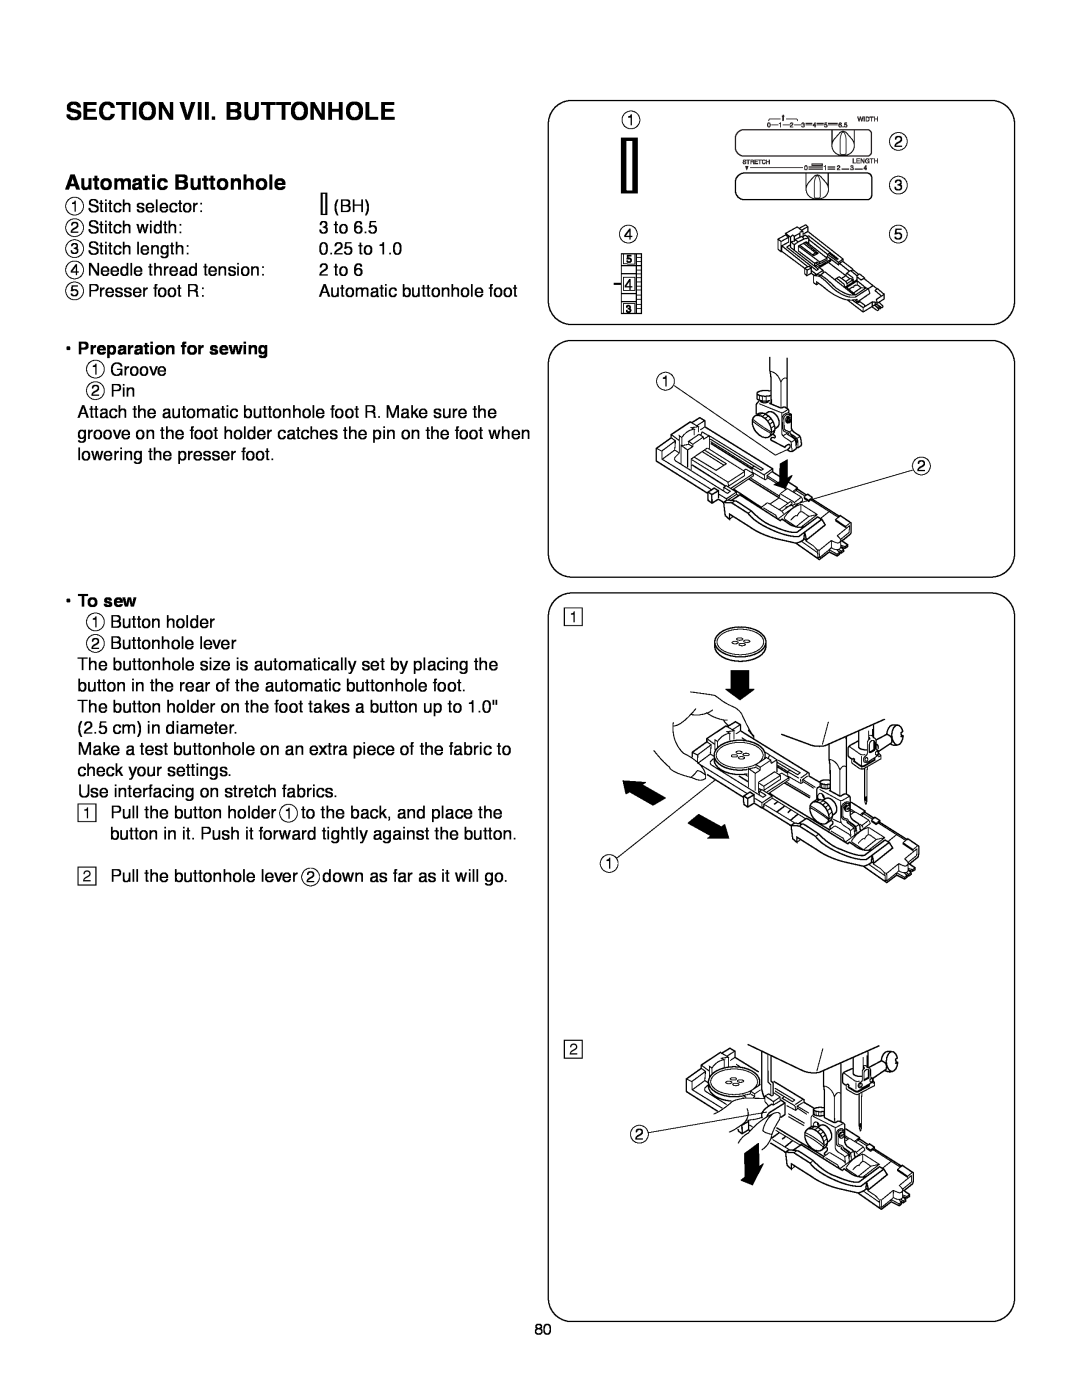 Janome MS-5027 instruction manual Section Vii. Buttonhole, Automatic Buttonhole, Preparation for sewing 1 Groove, To sew 